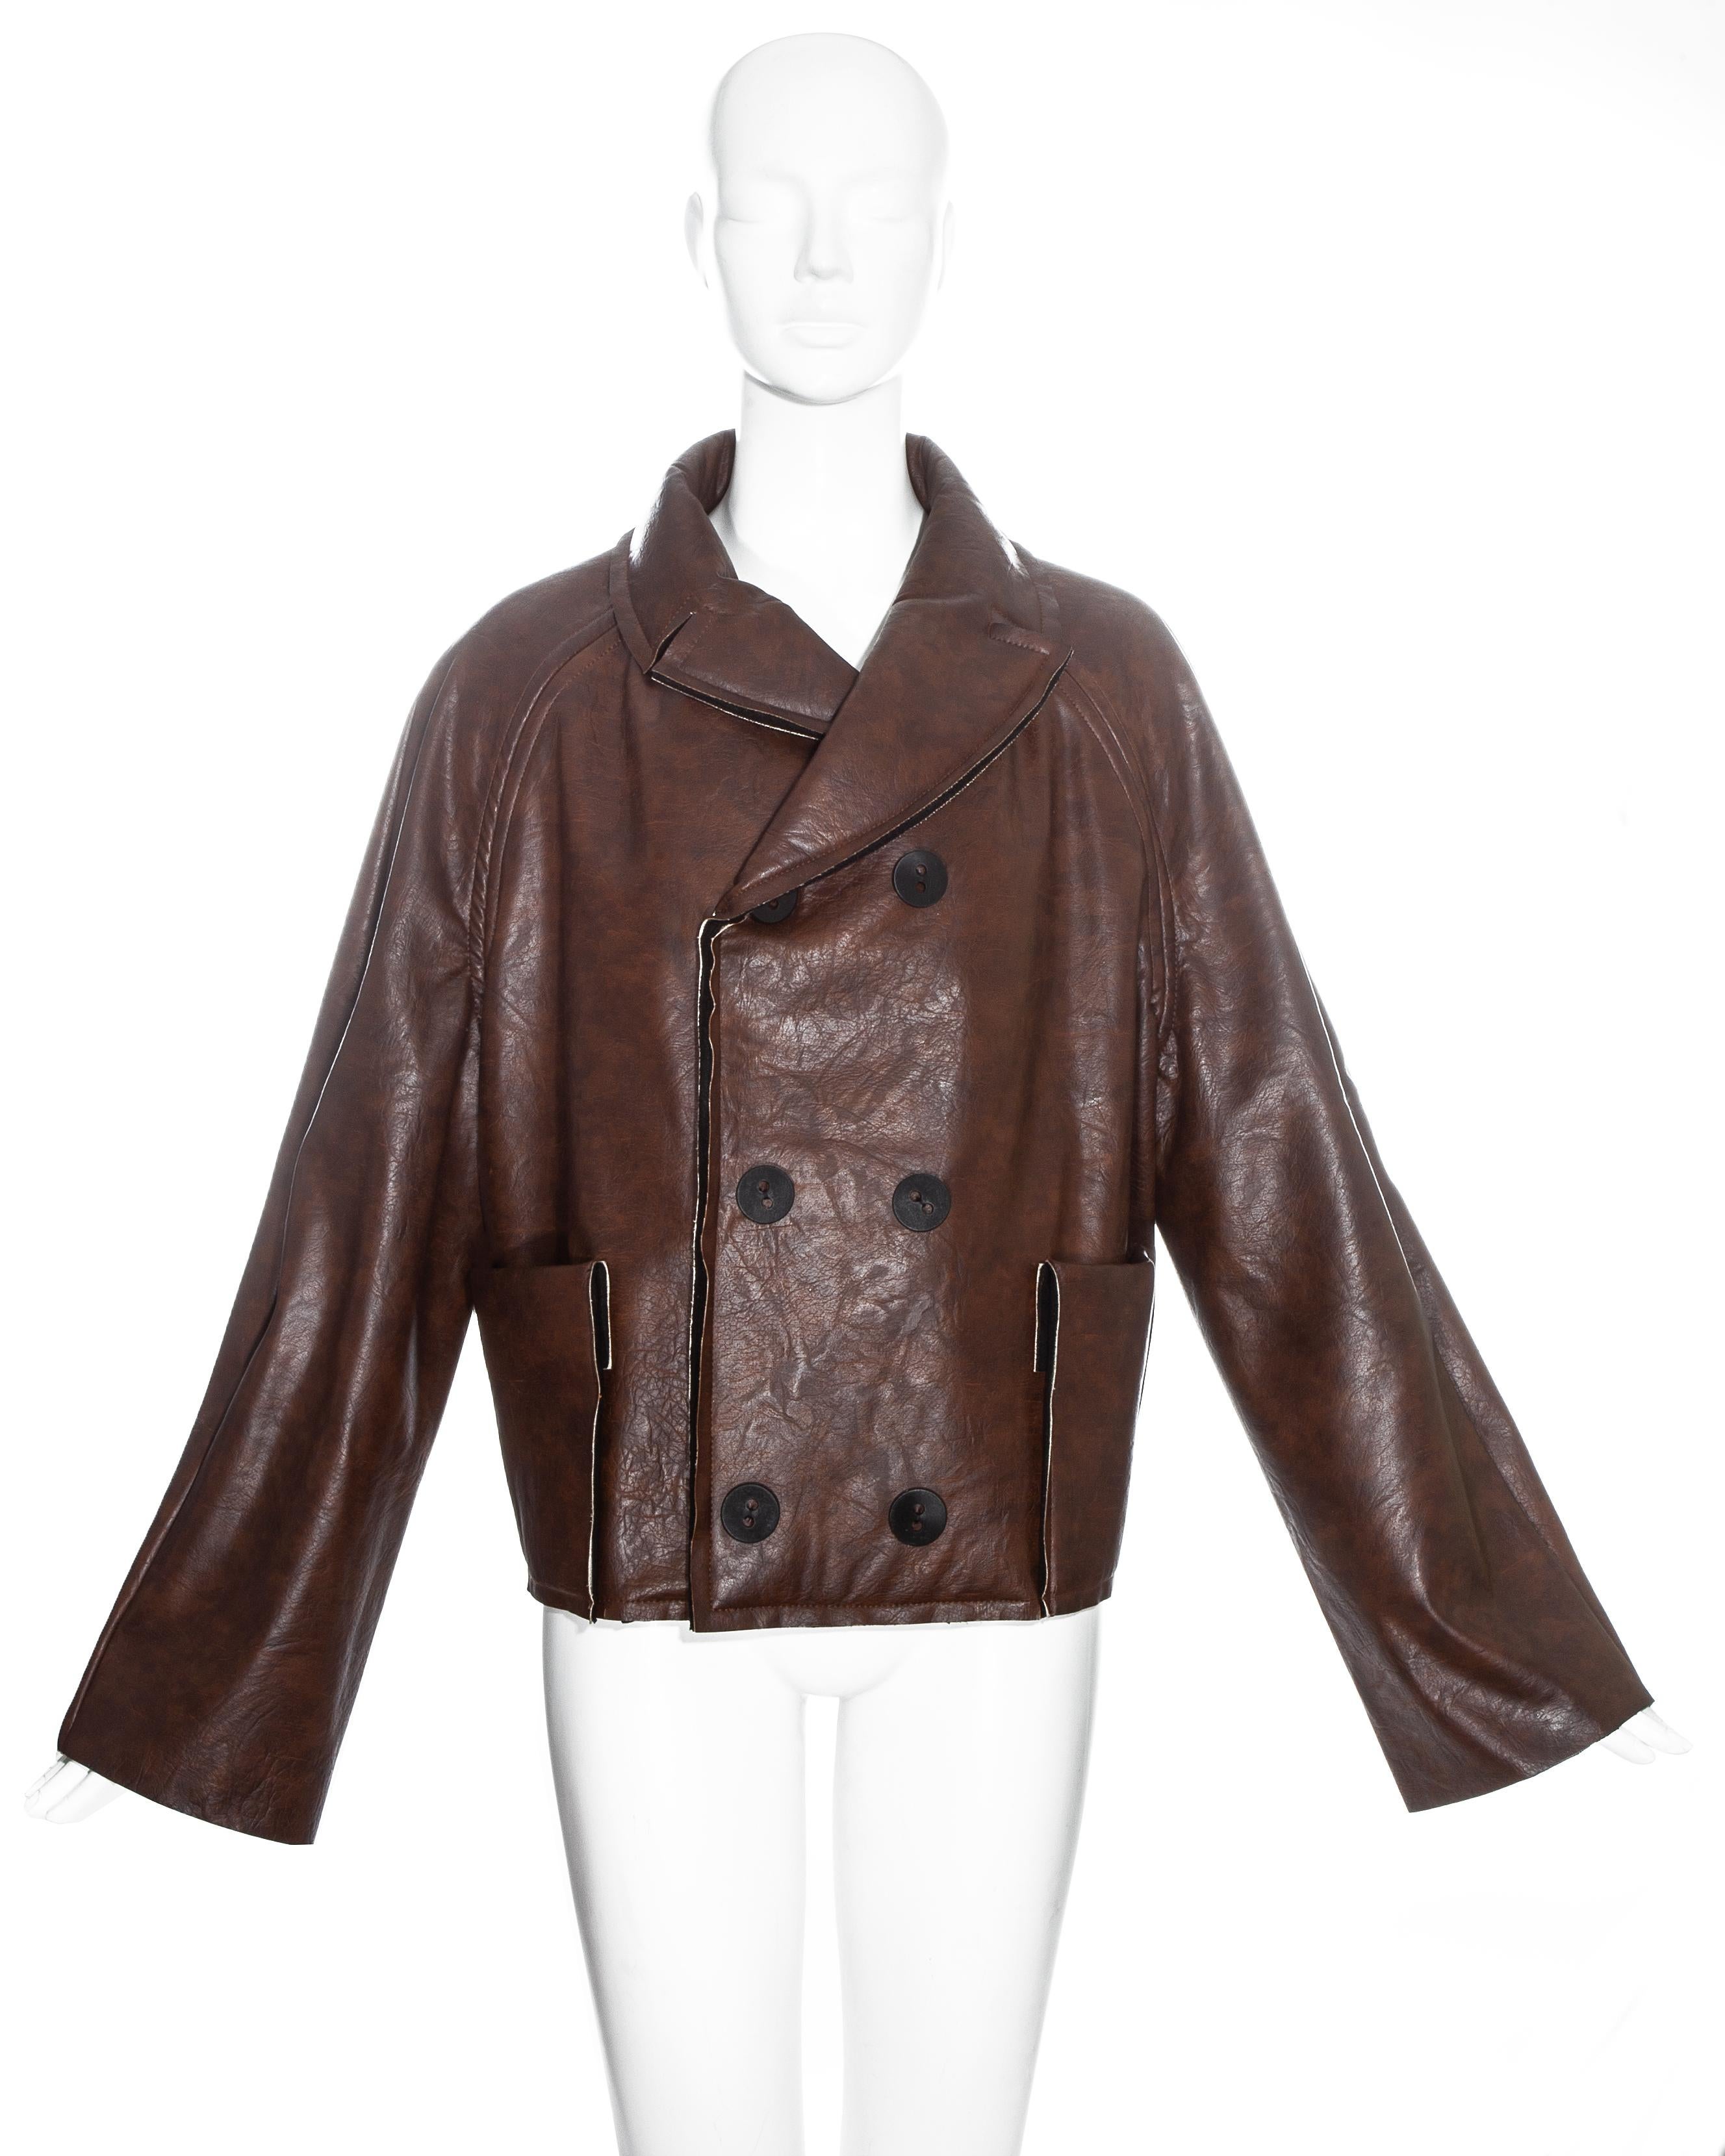 Martin Margiela brown leatherette double breasted jacket with large snap button closures, exposed seams and two front patch pockets. For this collection Margiela reproduced doll's clothing and enlarged them to human size.

Fall-Winter 1994